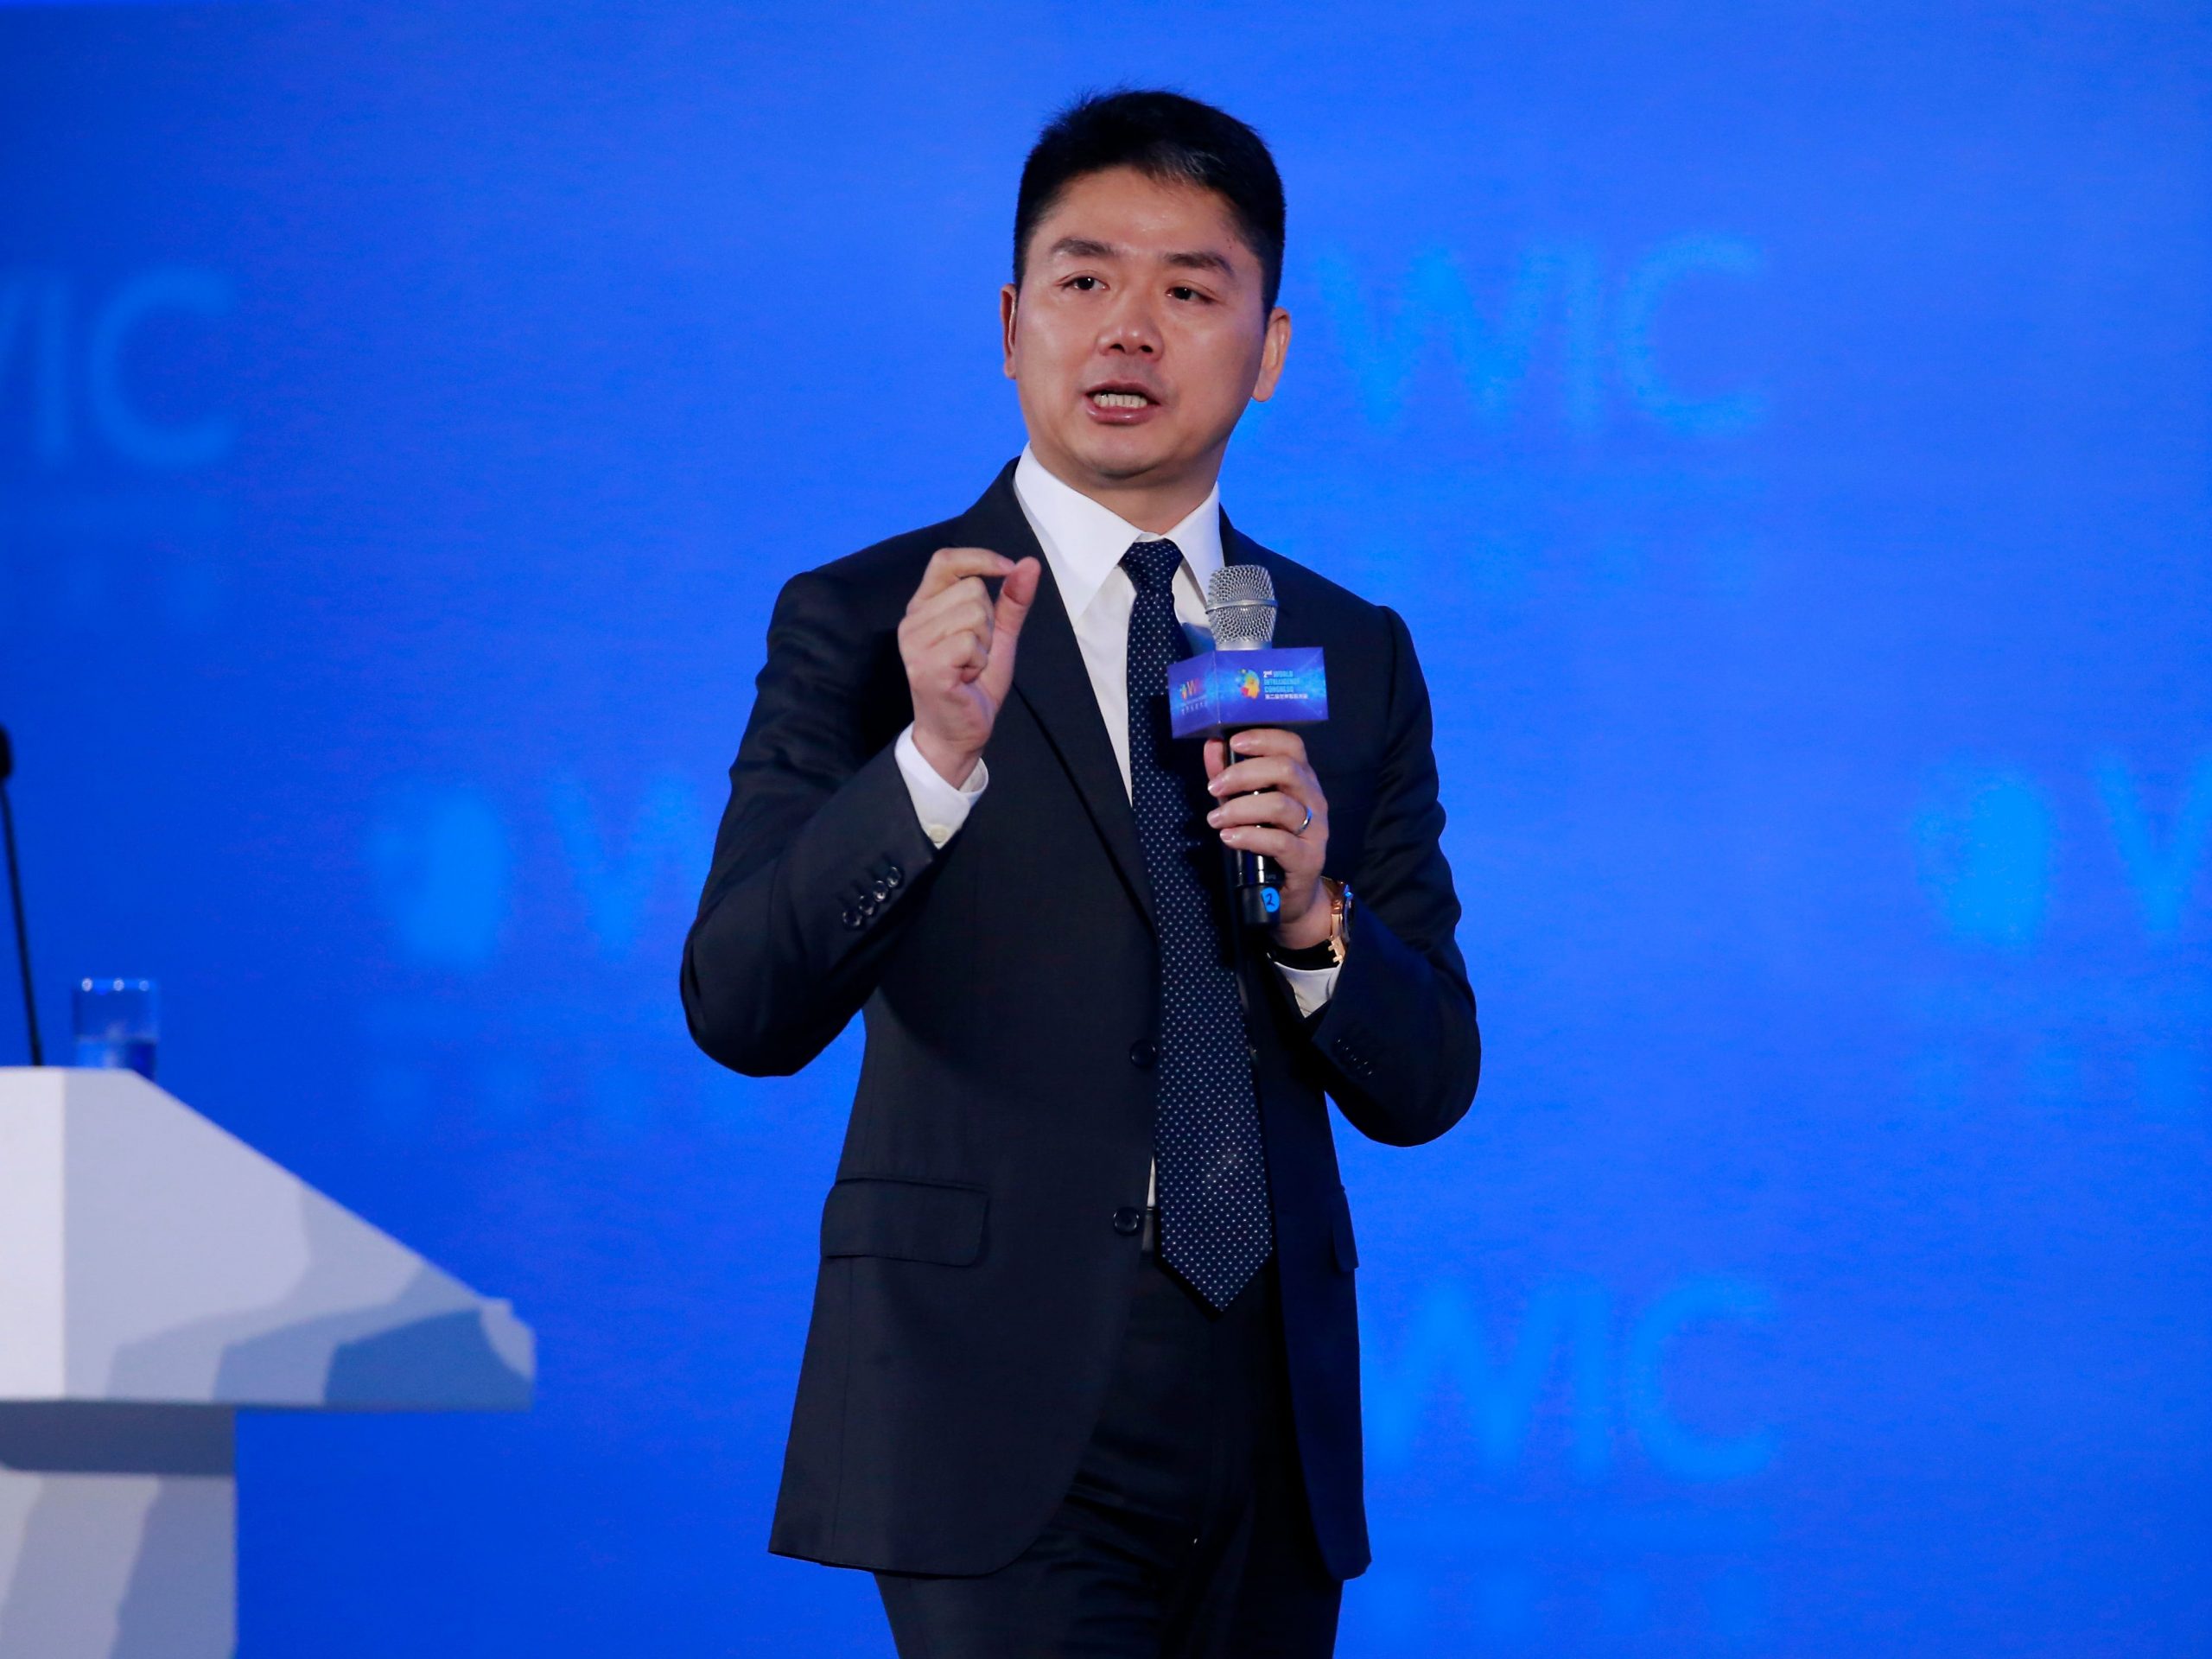 CEO of JD.com Richard Liu delivers a speech during the 2nd World Intelligence Congress (WIC 2018) at Tianjin Meijiang Convention and Exhibition Center on May 16, 2018 in Tianjin, China.